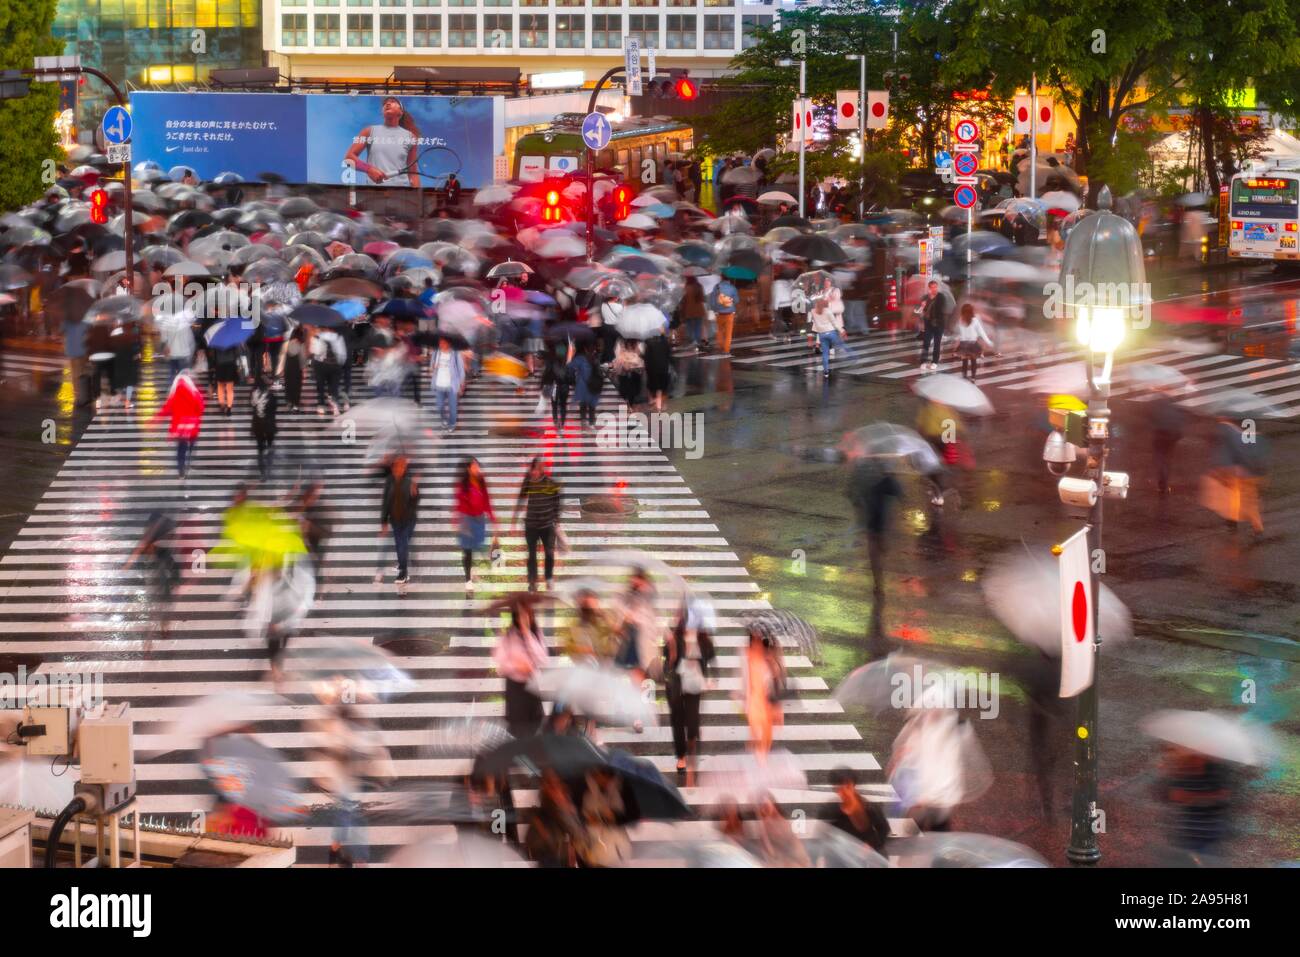 Crowd with umbrellas on zebra crossings at night, crossing Shibuya Crossing, Shibuya, Tokyo, Japan Stock Photo